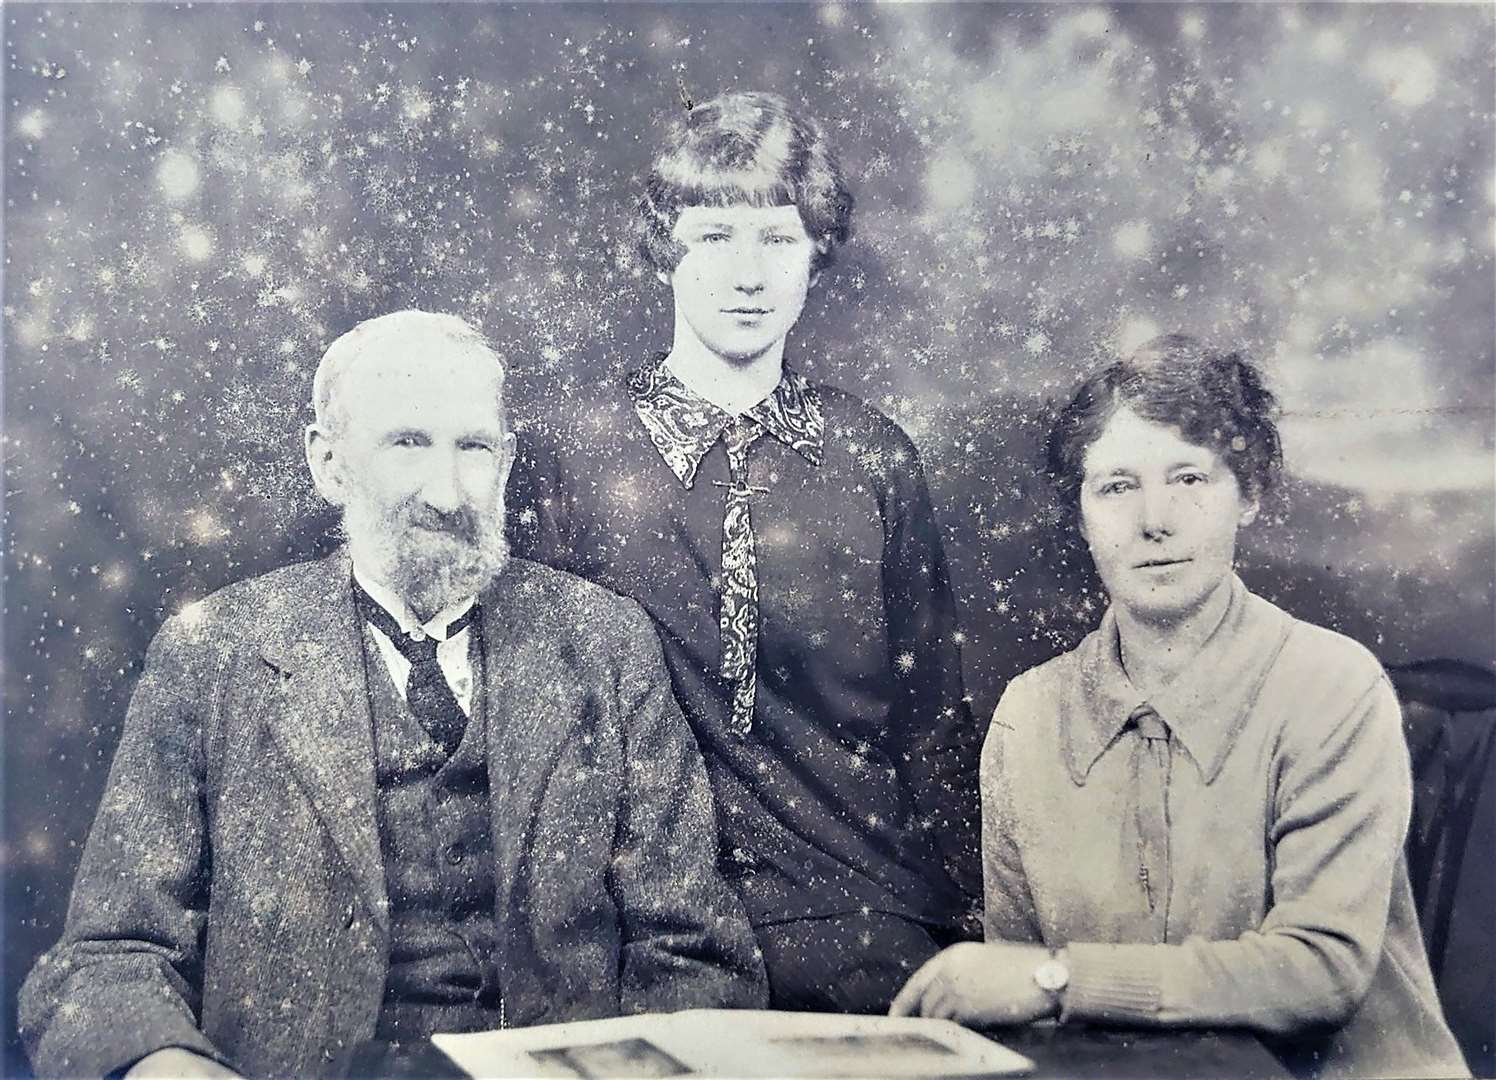 Group photograph, possibly showing Isabella and her parents.